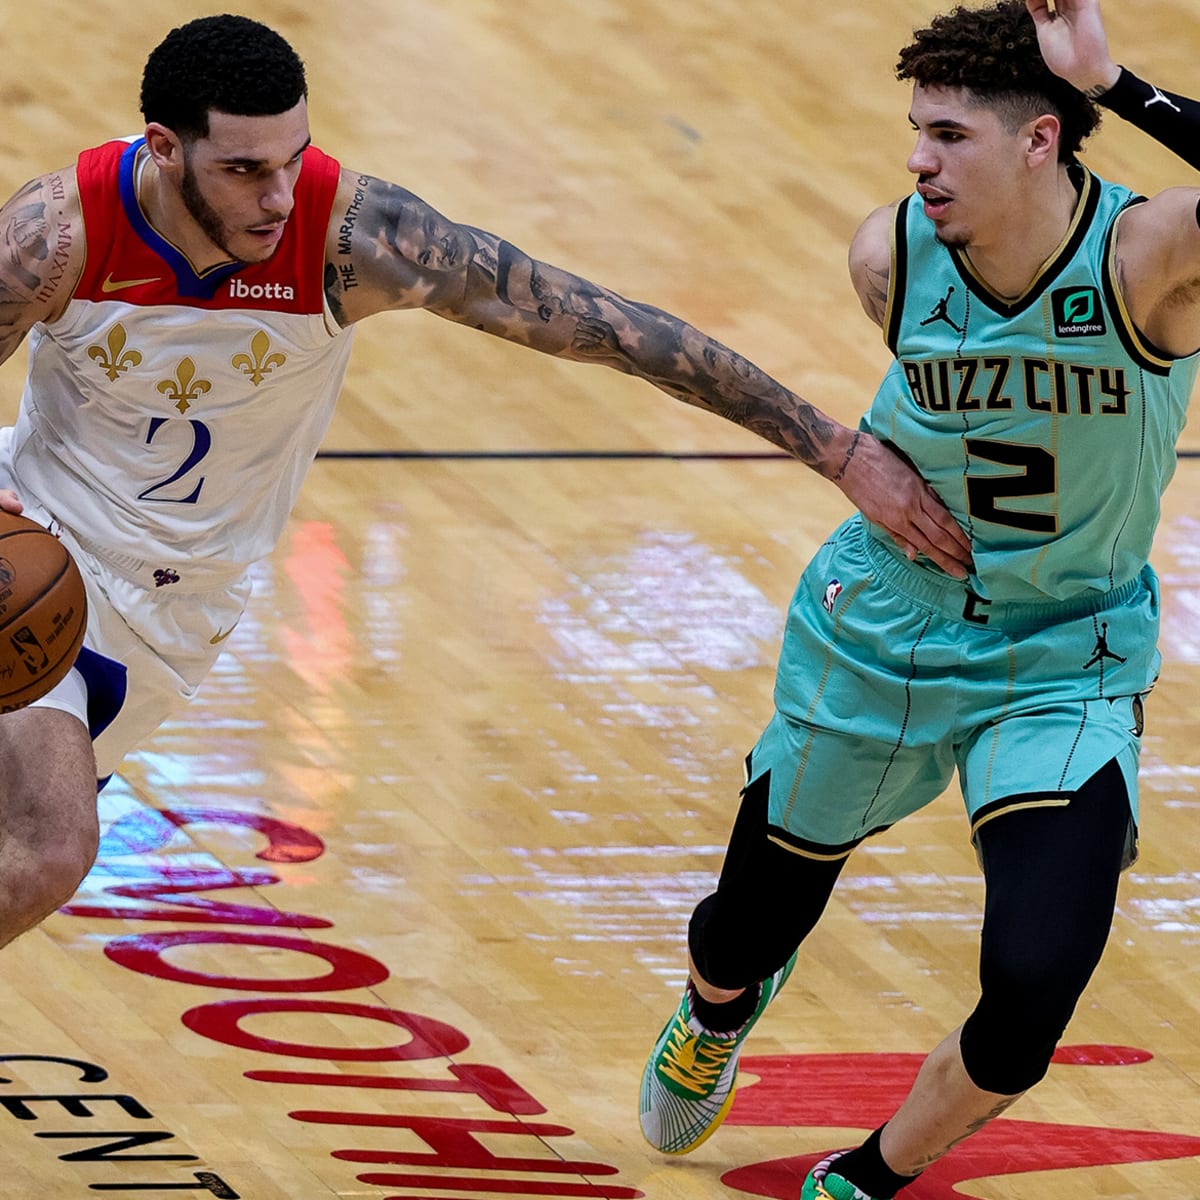 It's LaMelo vs. Lonzo Ball when Bulls match up with Hornets - Los